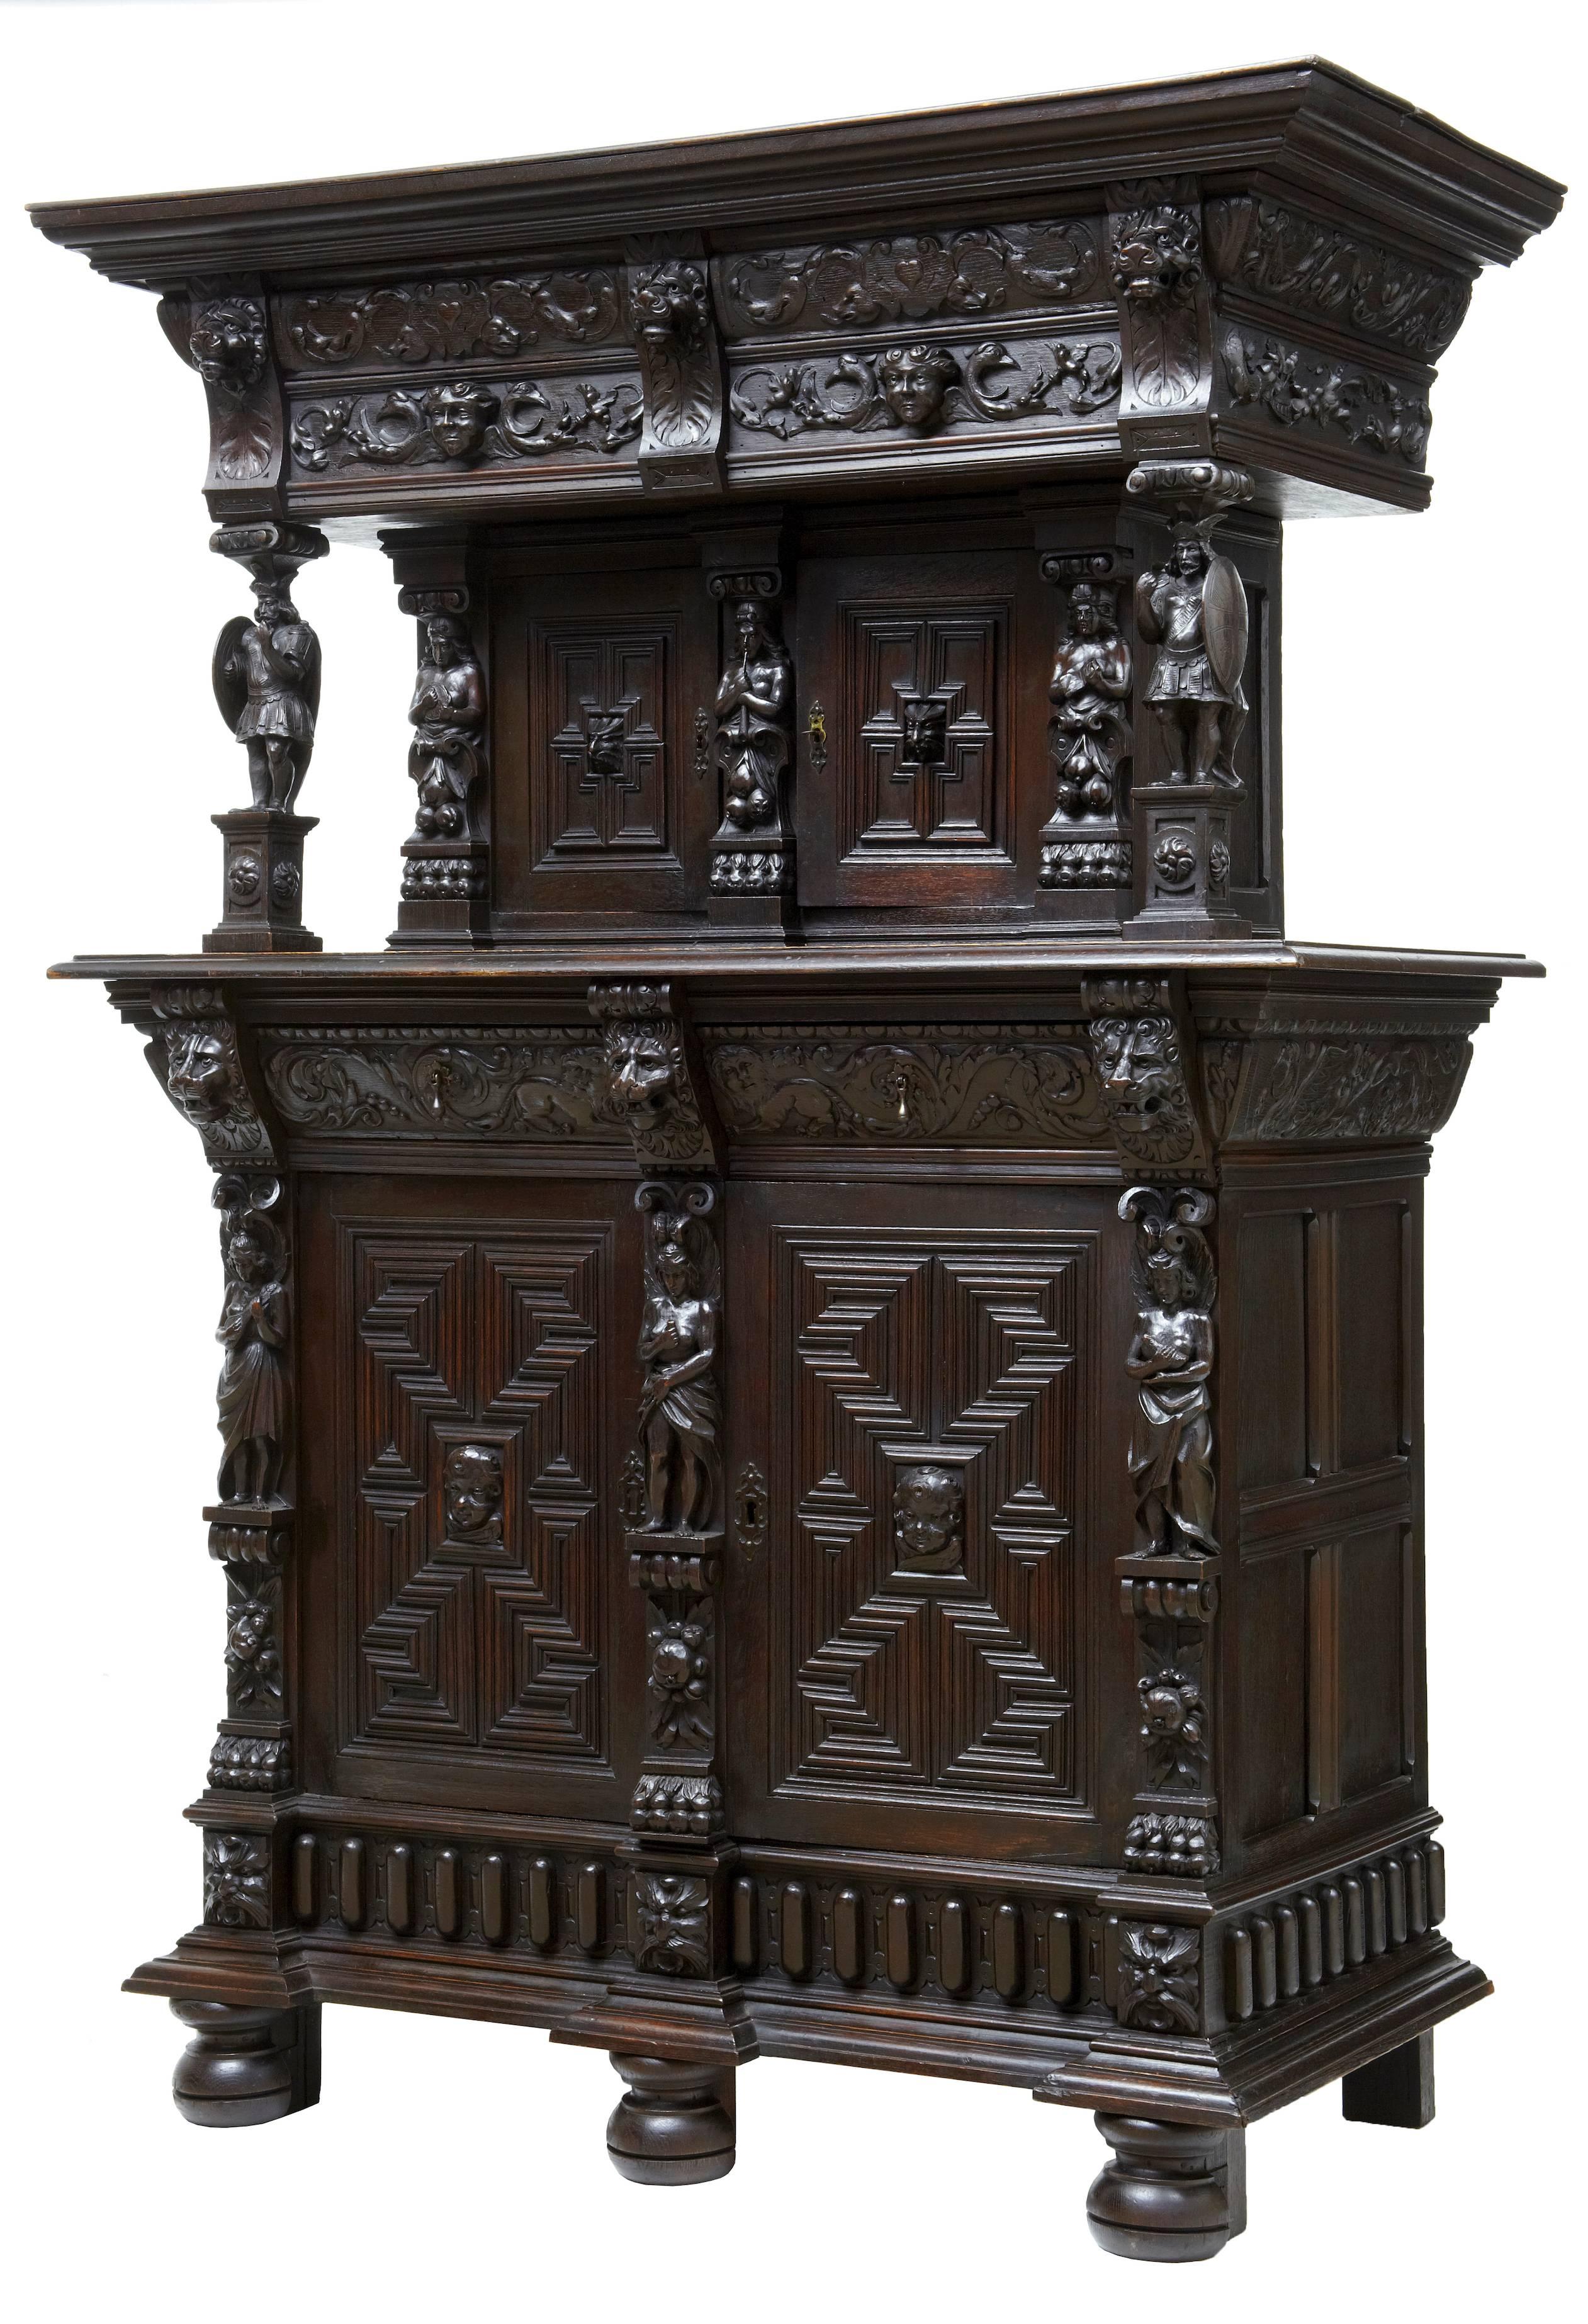 Good quality carved court cupboard, circa 1880.

Small double door cupboard in the top section, followed by two drawers and a larger double door cupboard beneath.

Profusely carved with figures, lion heads, swags and geometric